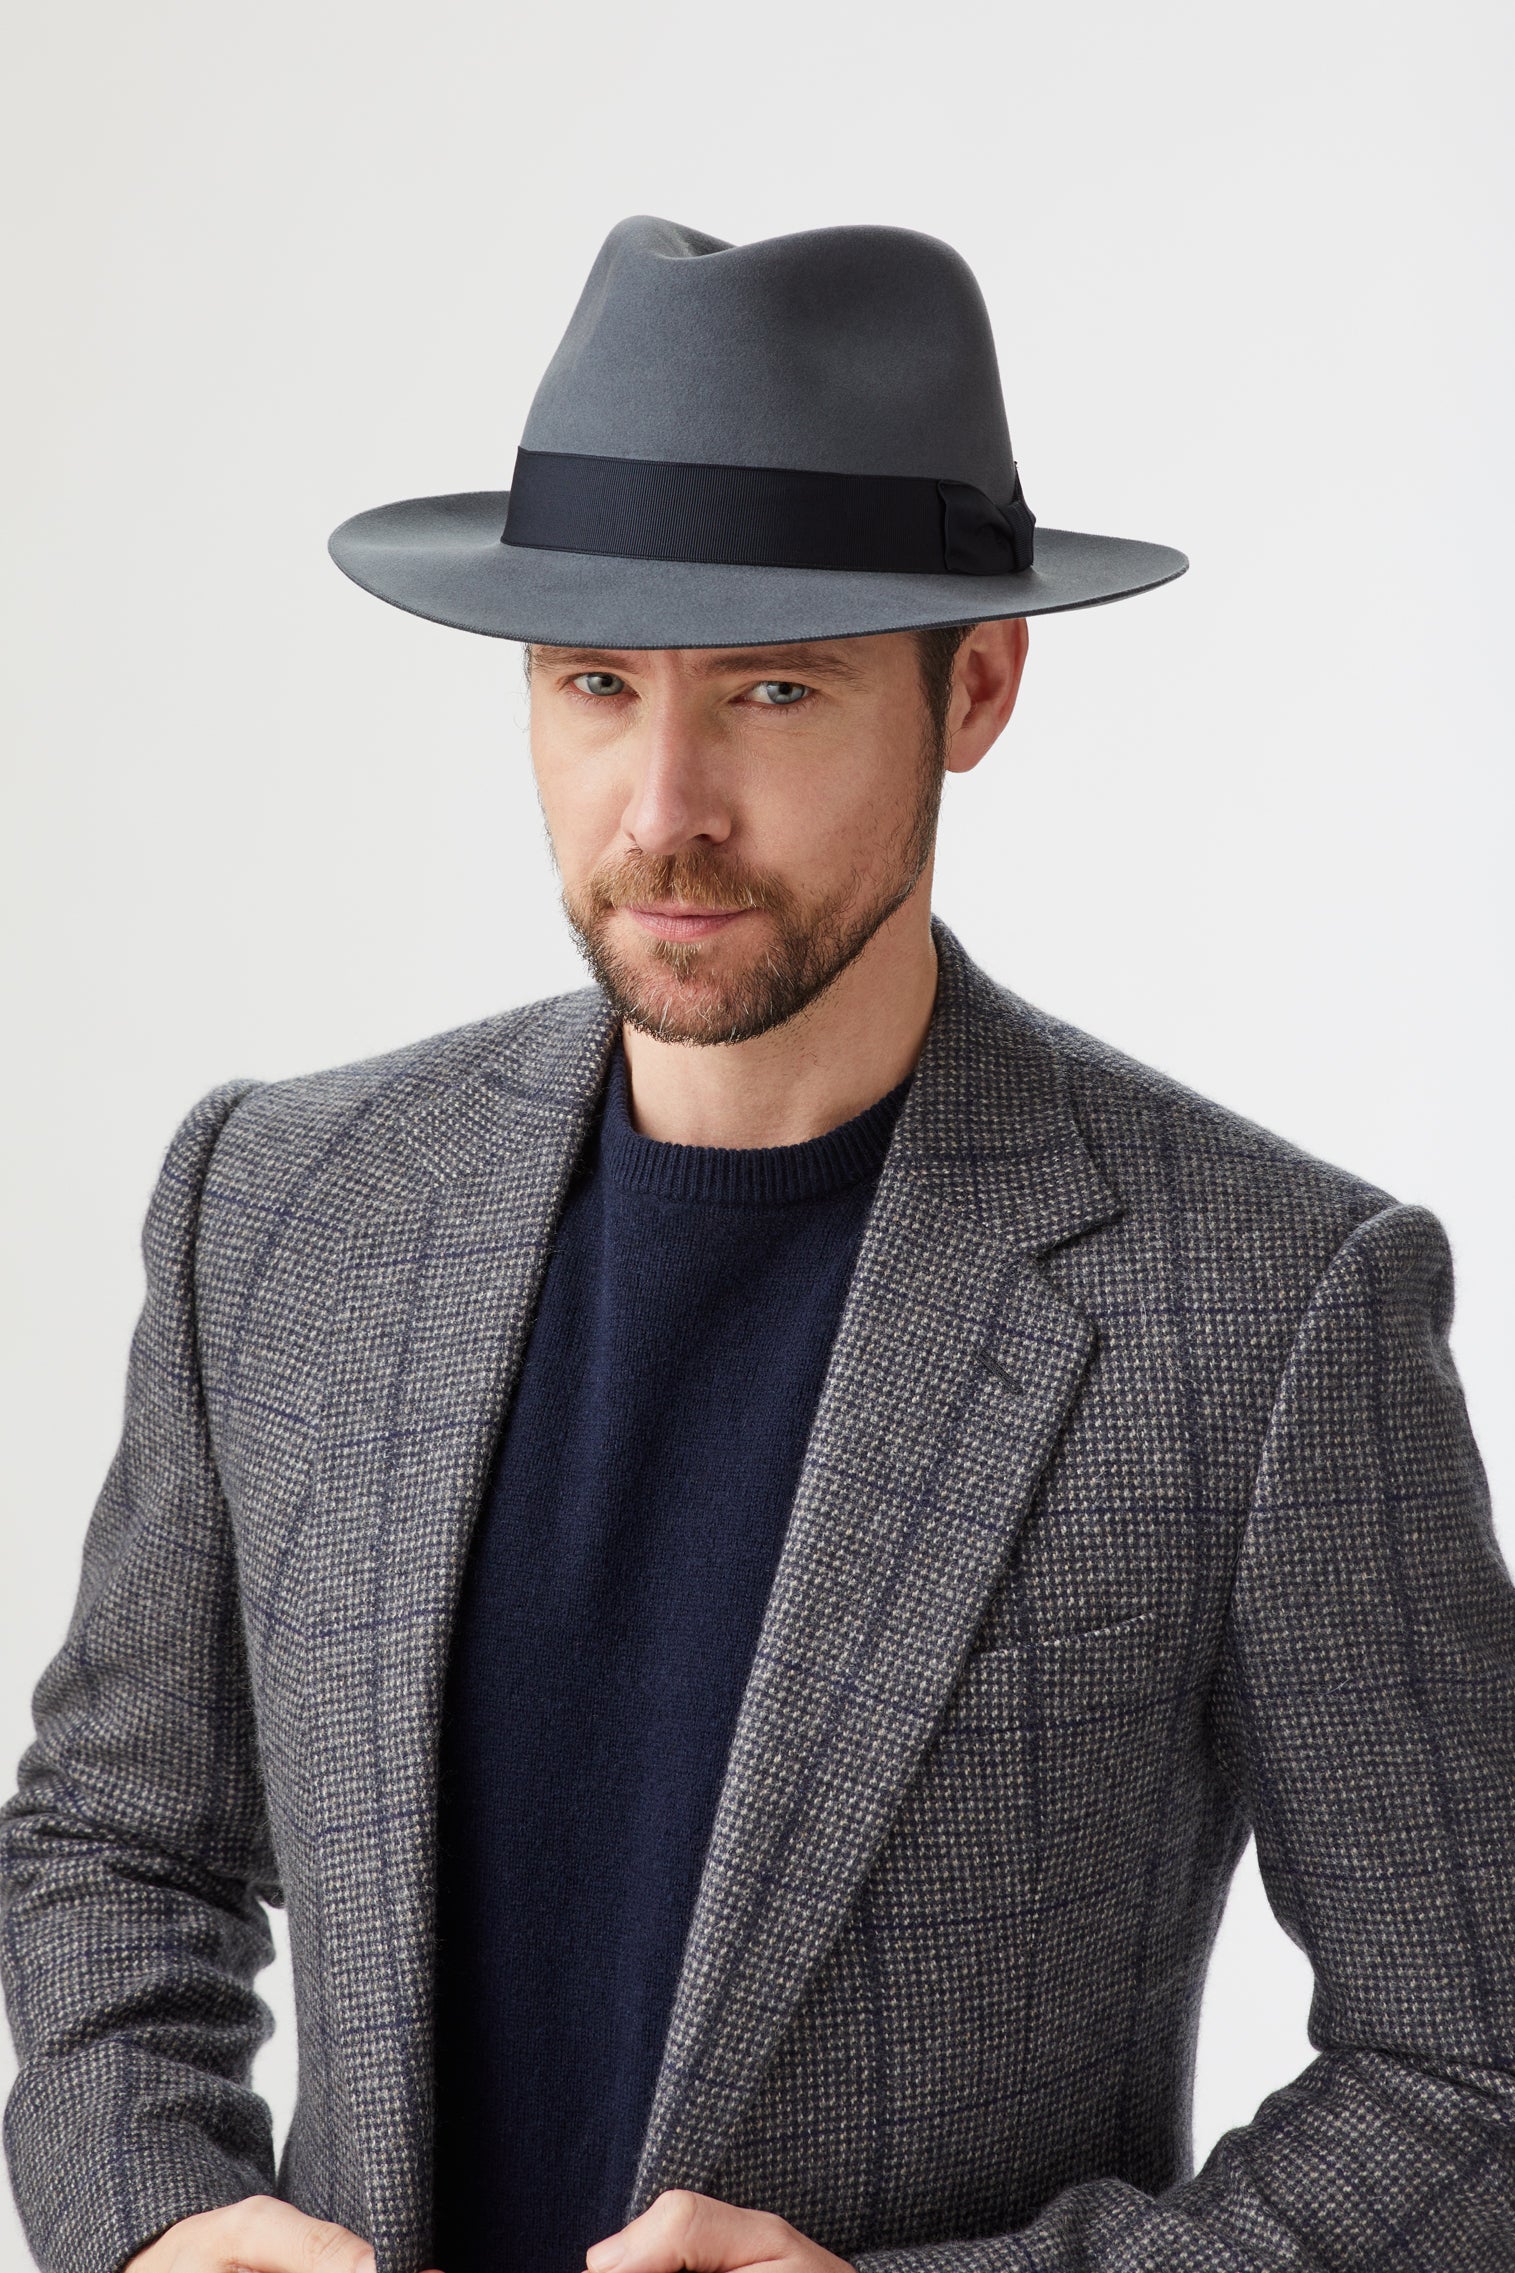 Fairbanks Trilby - Father's Day Gift Guide - Lock & Co. Hatters London UK